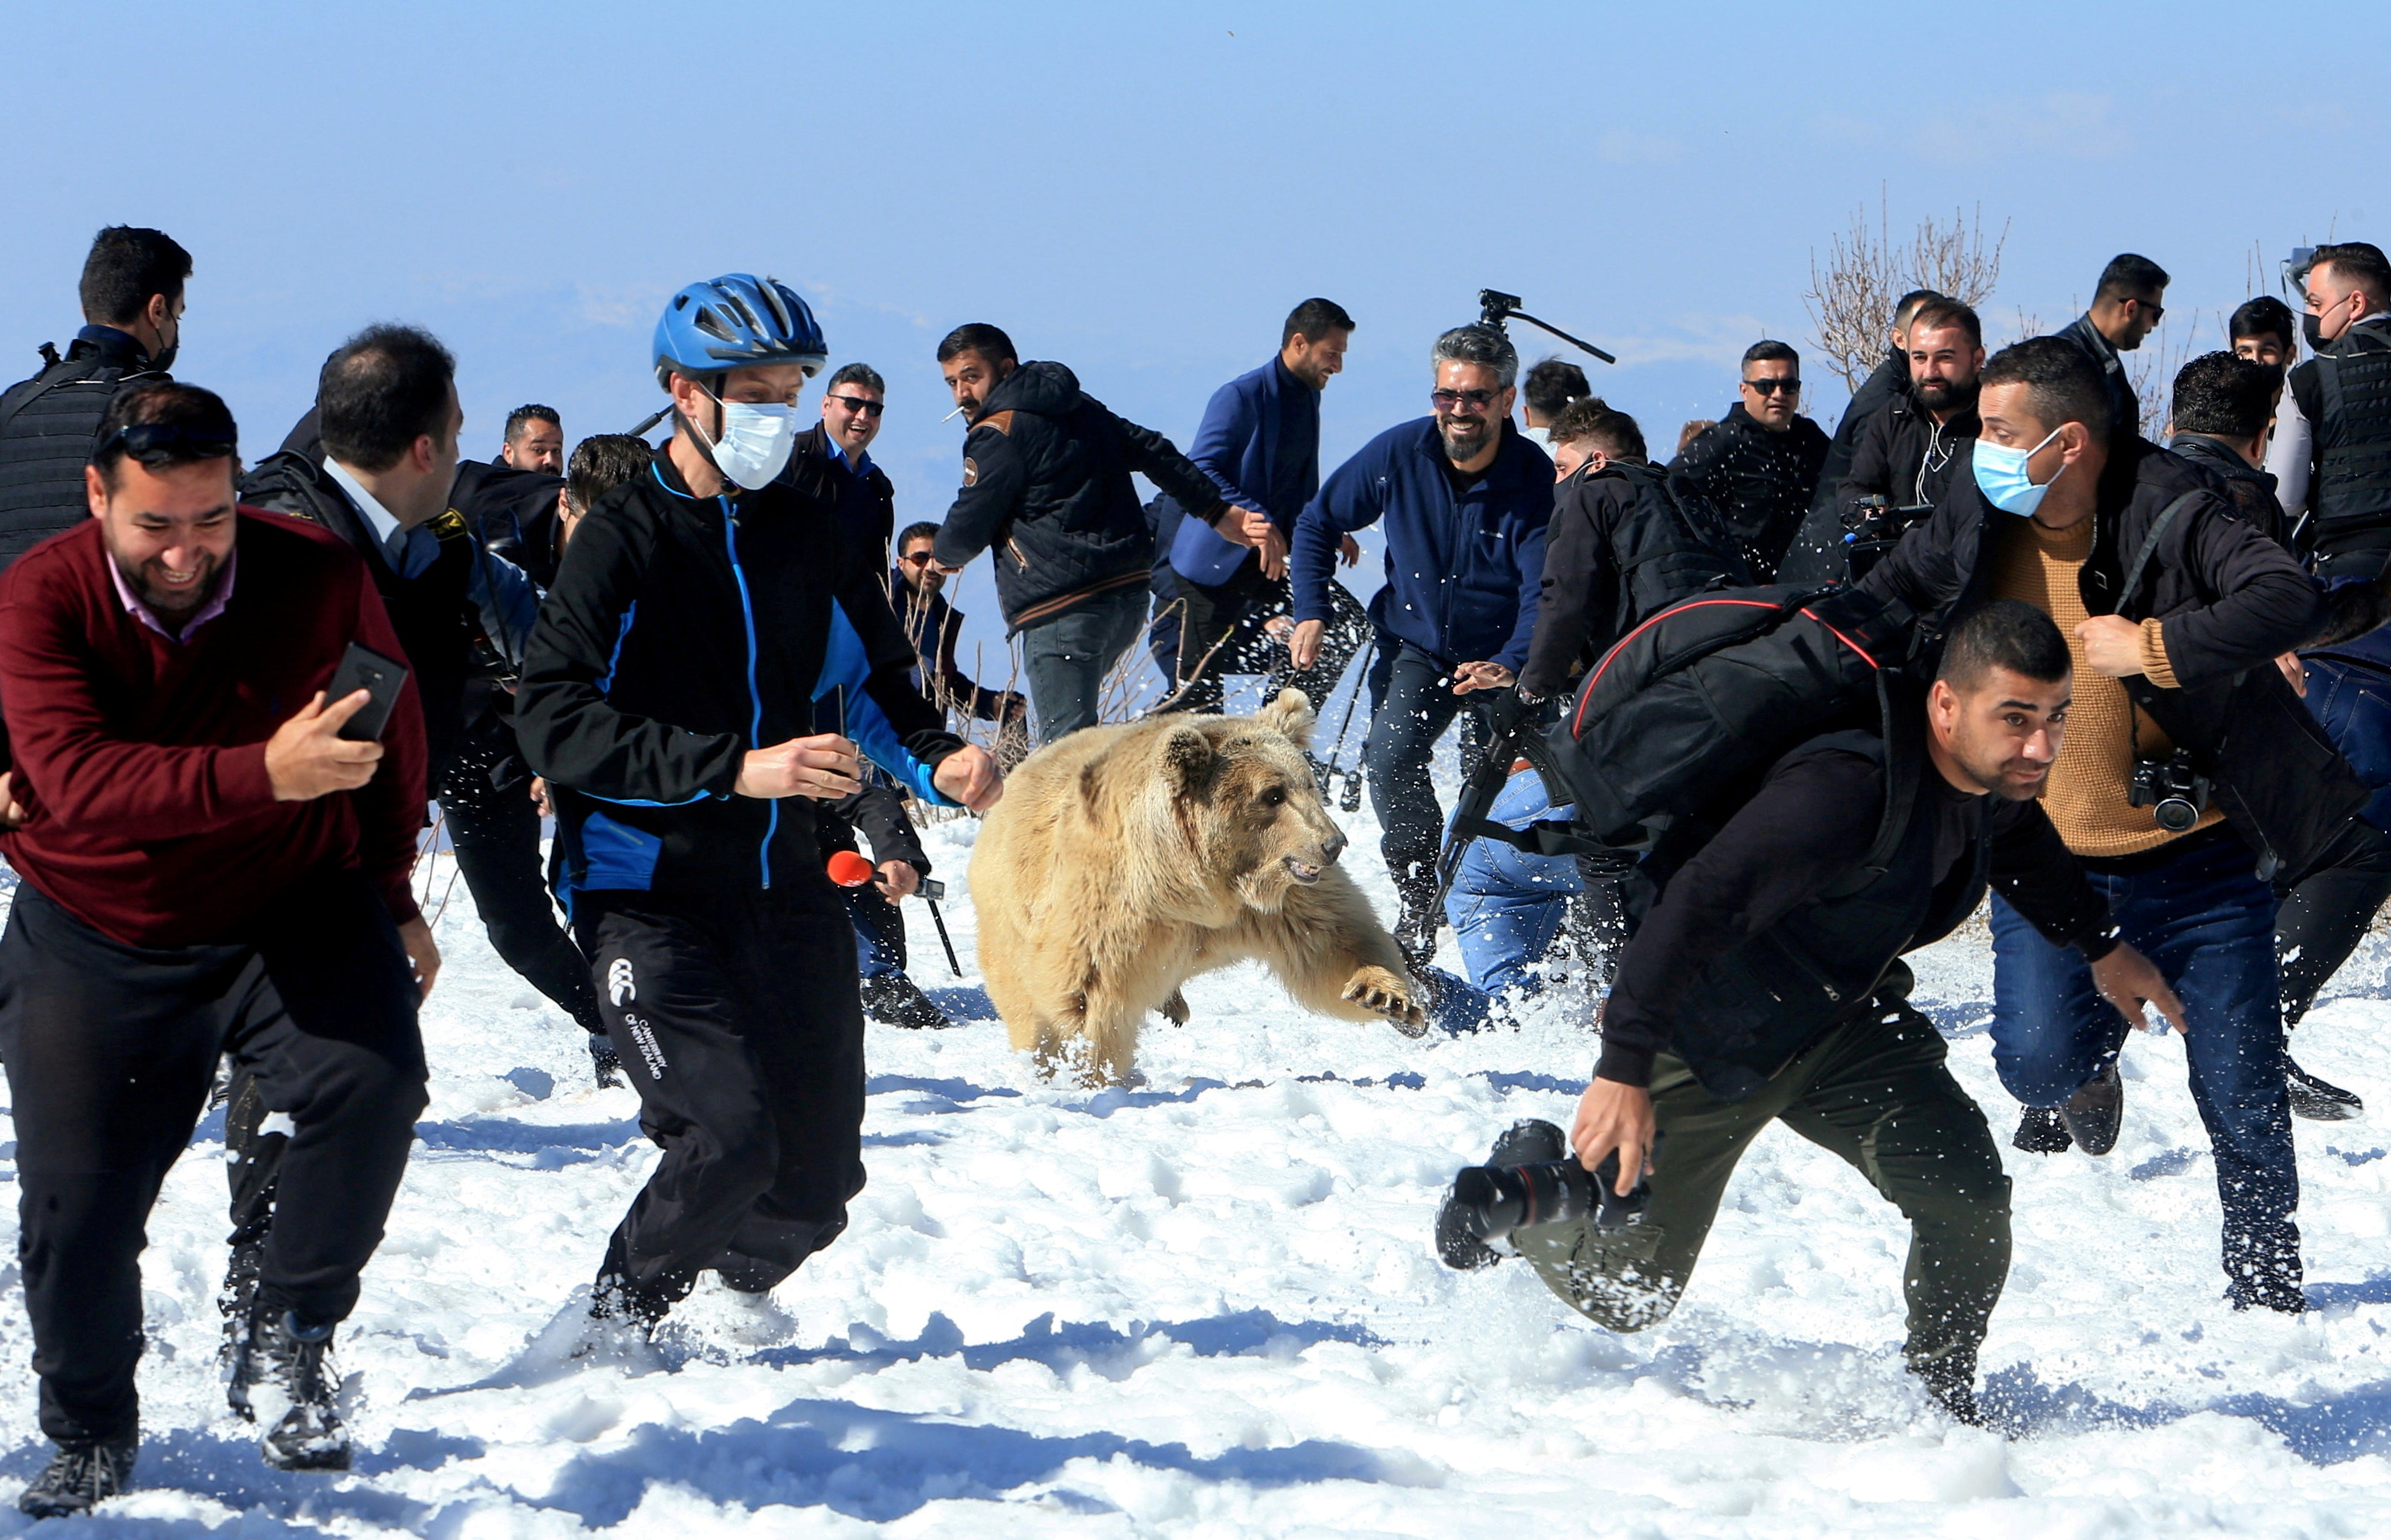 People run for safety as Kurdish animal rights activists release a bear into the wild in Dohuk, Iraq